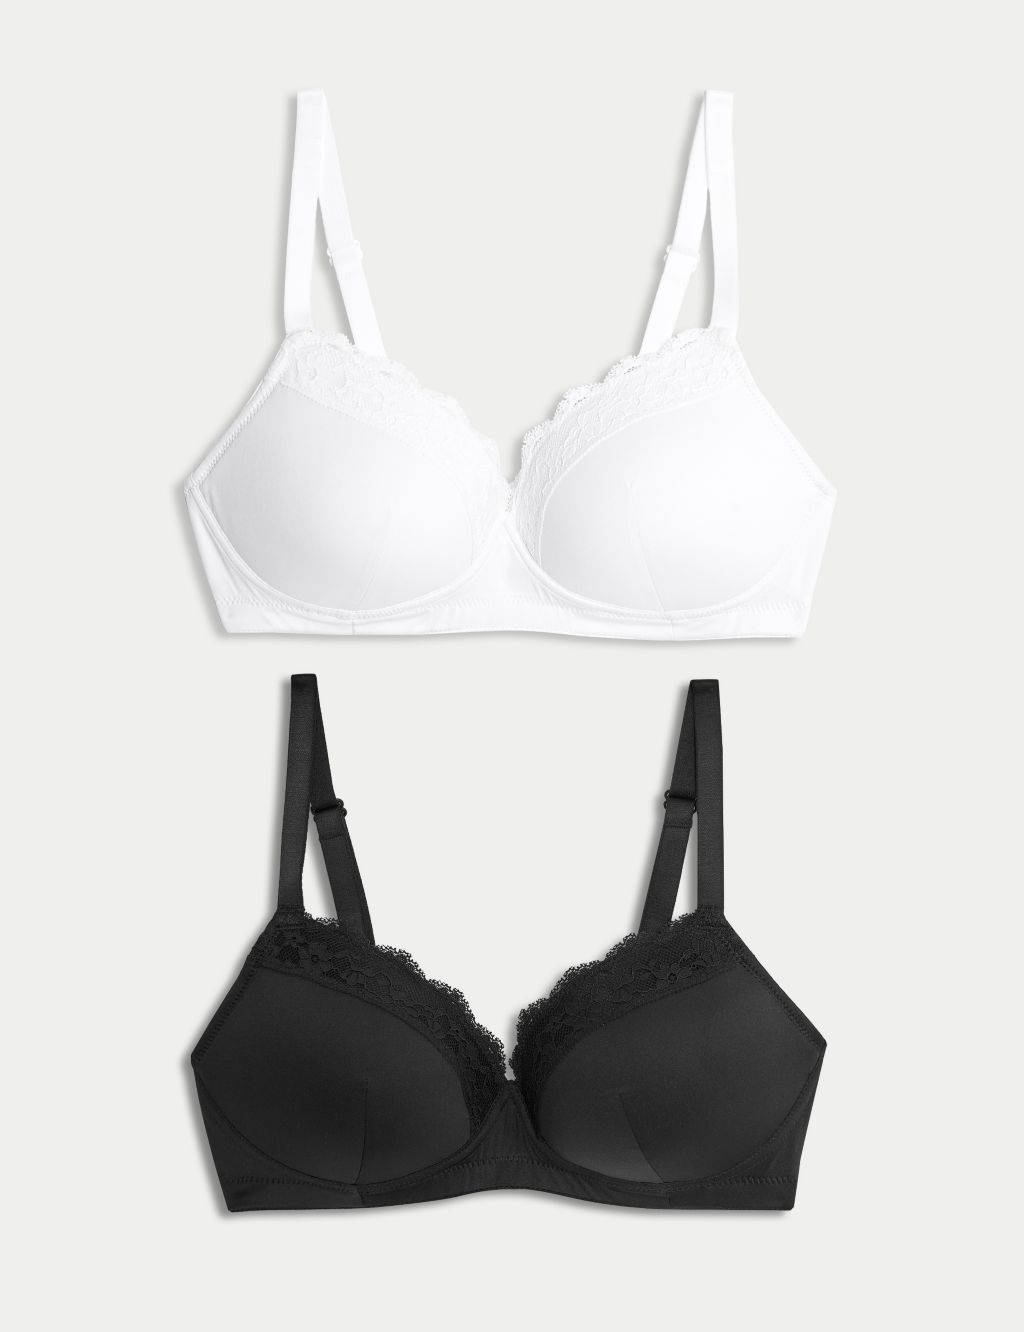 Buy Black/White Post Surgery Non Wired Lace Bras 2 Pack from the